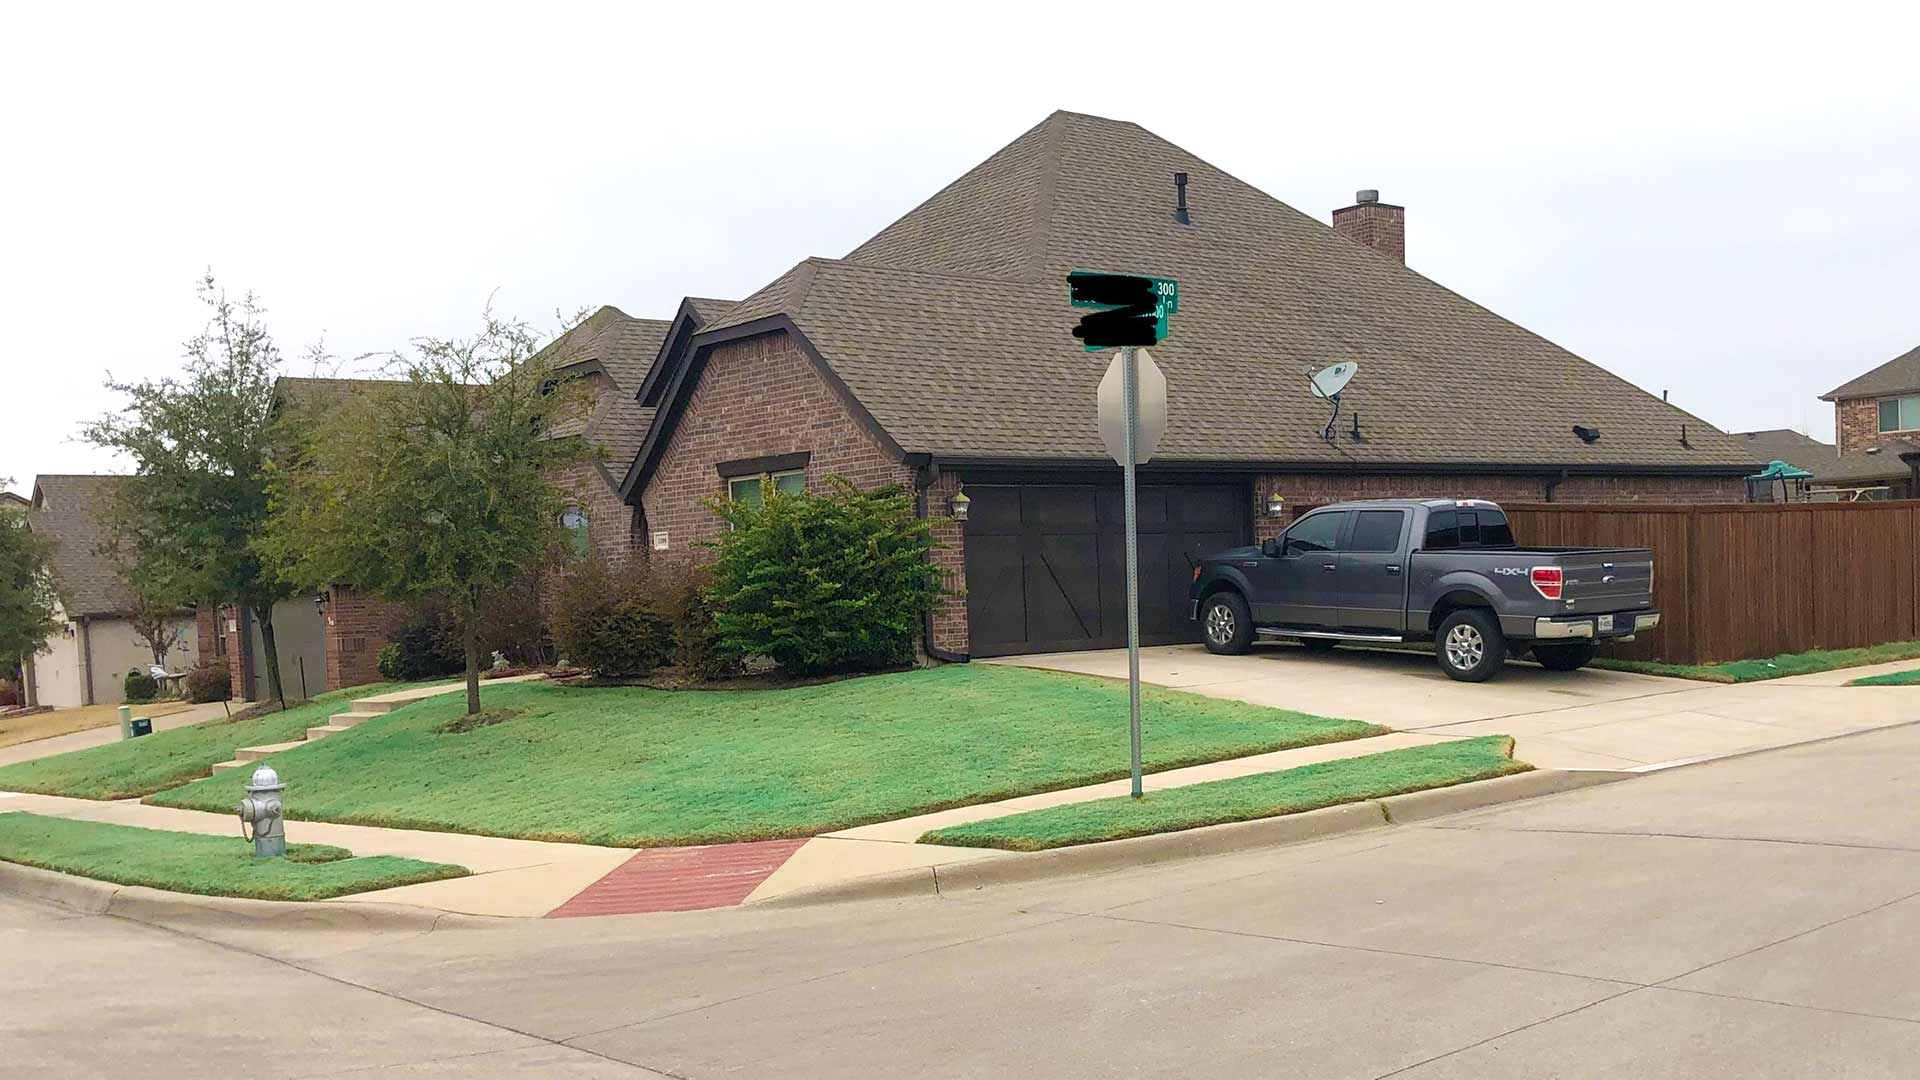 Haslet, TX home with recent lawn fertilization services.